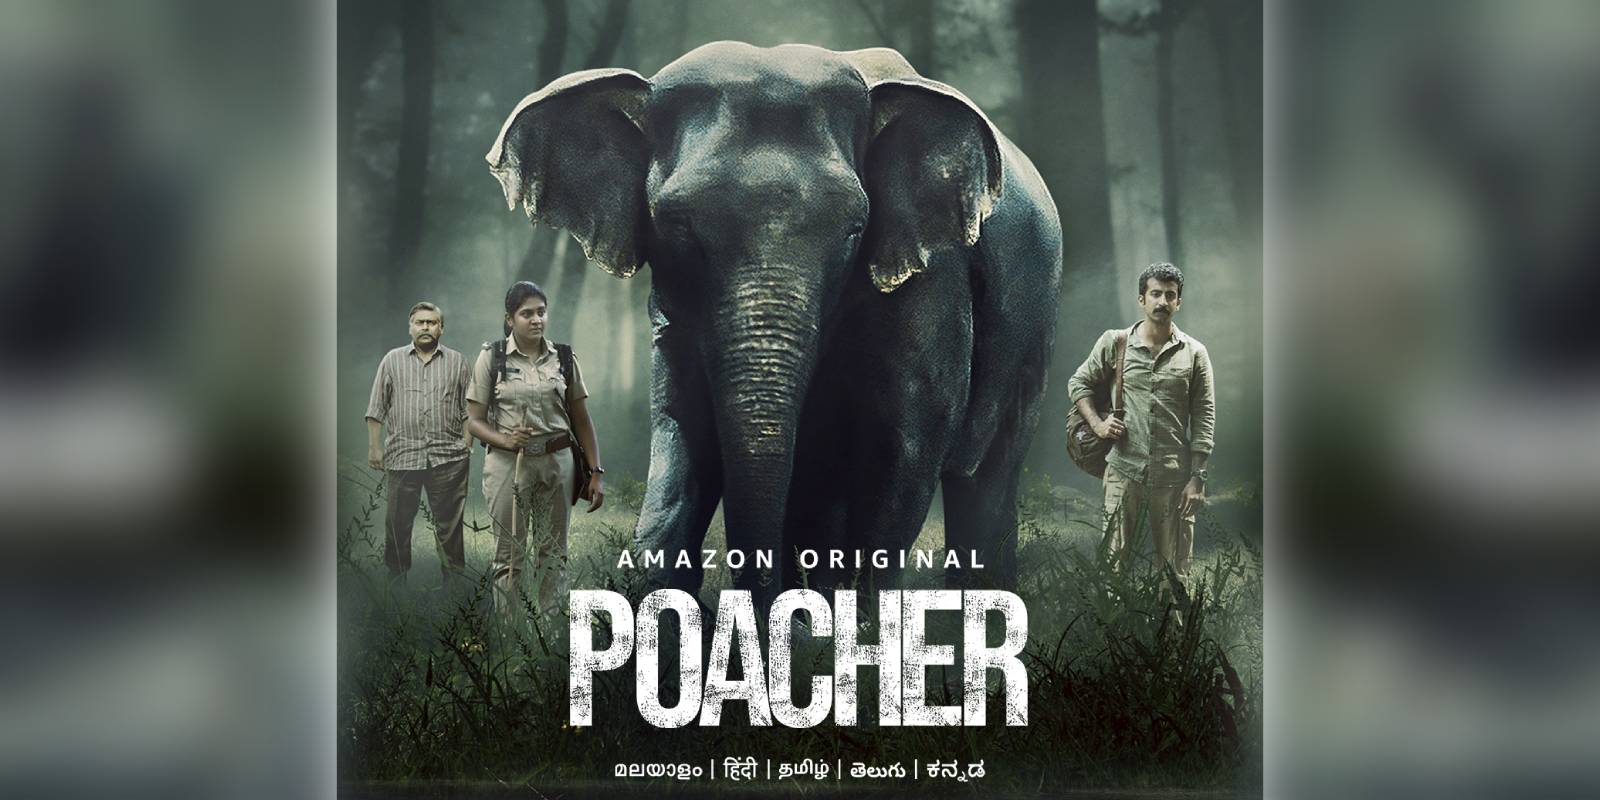 Poacher web series review: This gripping ecological drama thriller is a reminder of the need for peaceful coexistence between man and nature